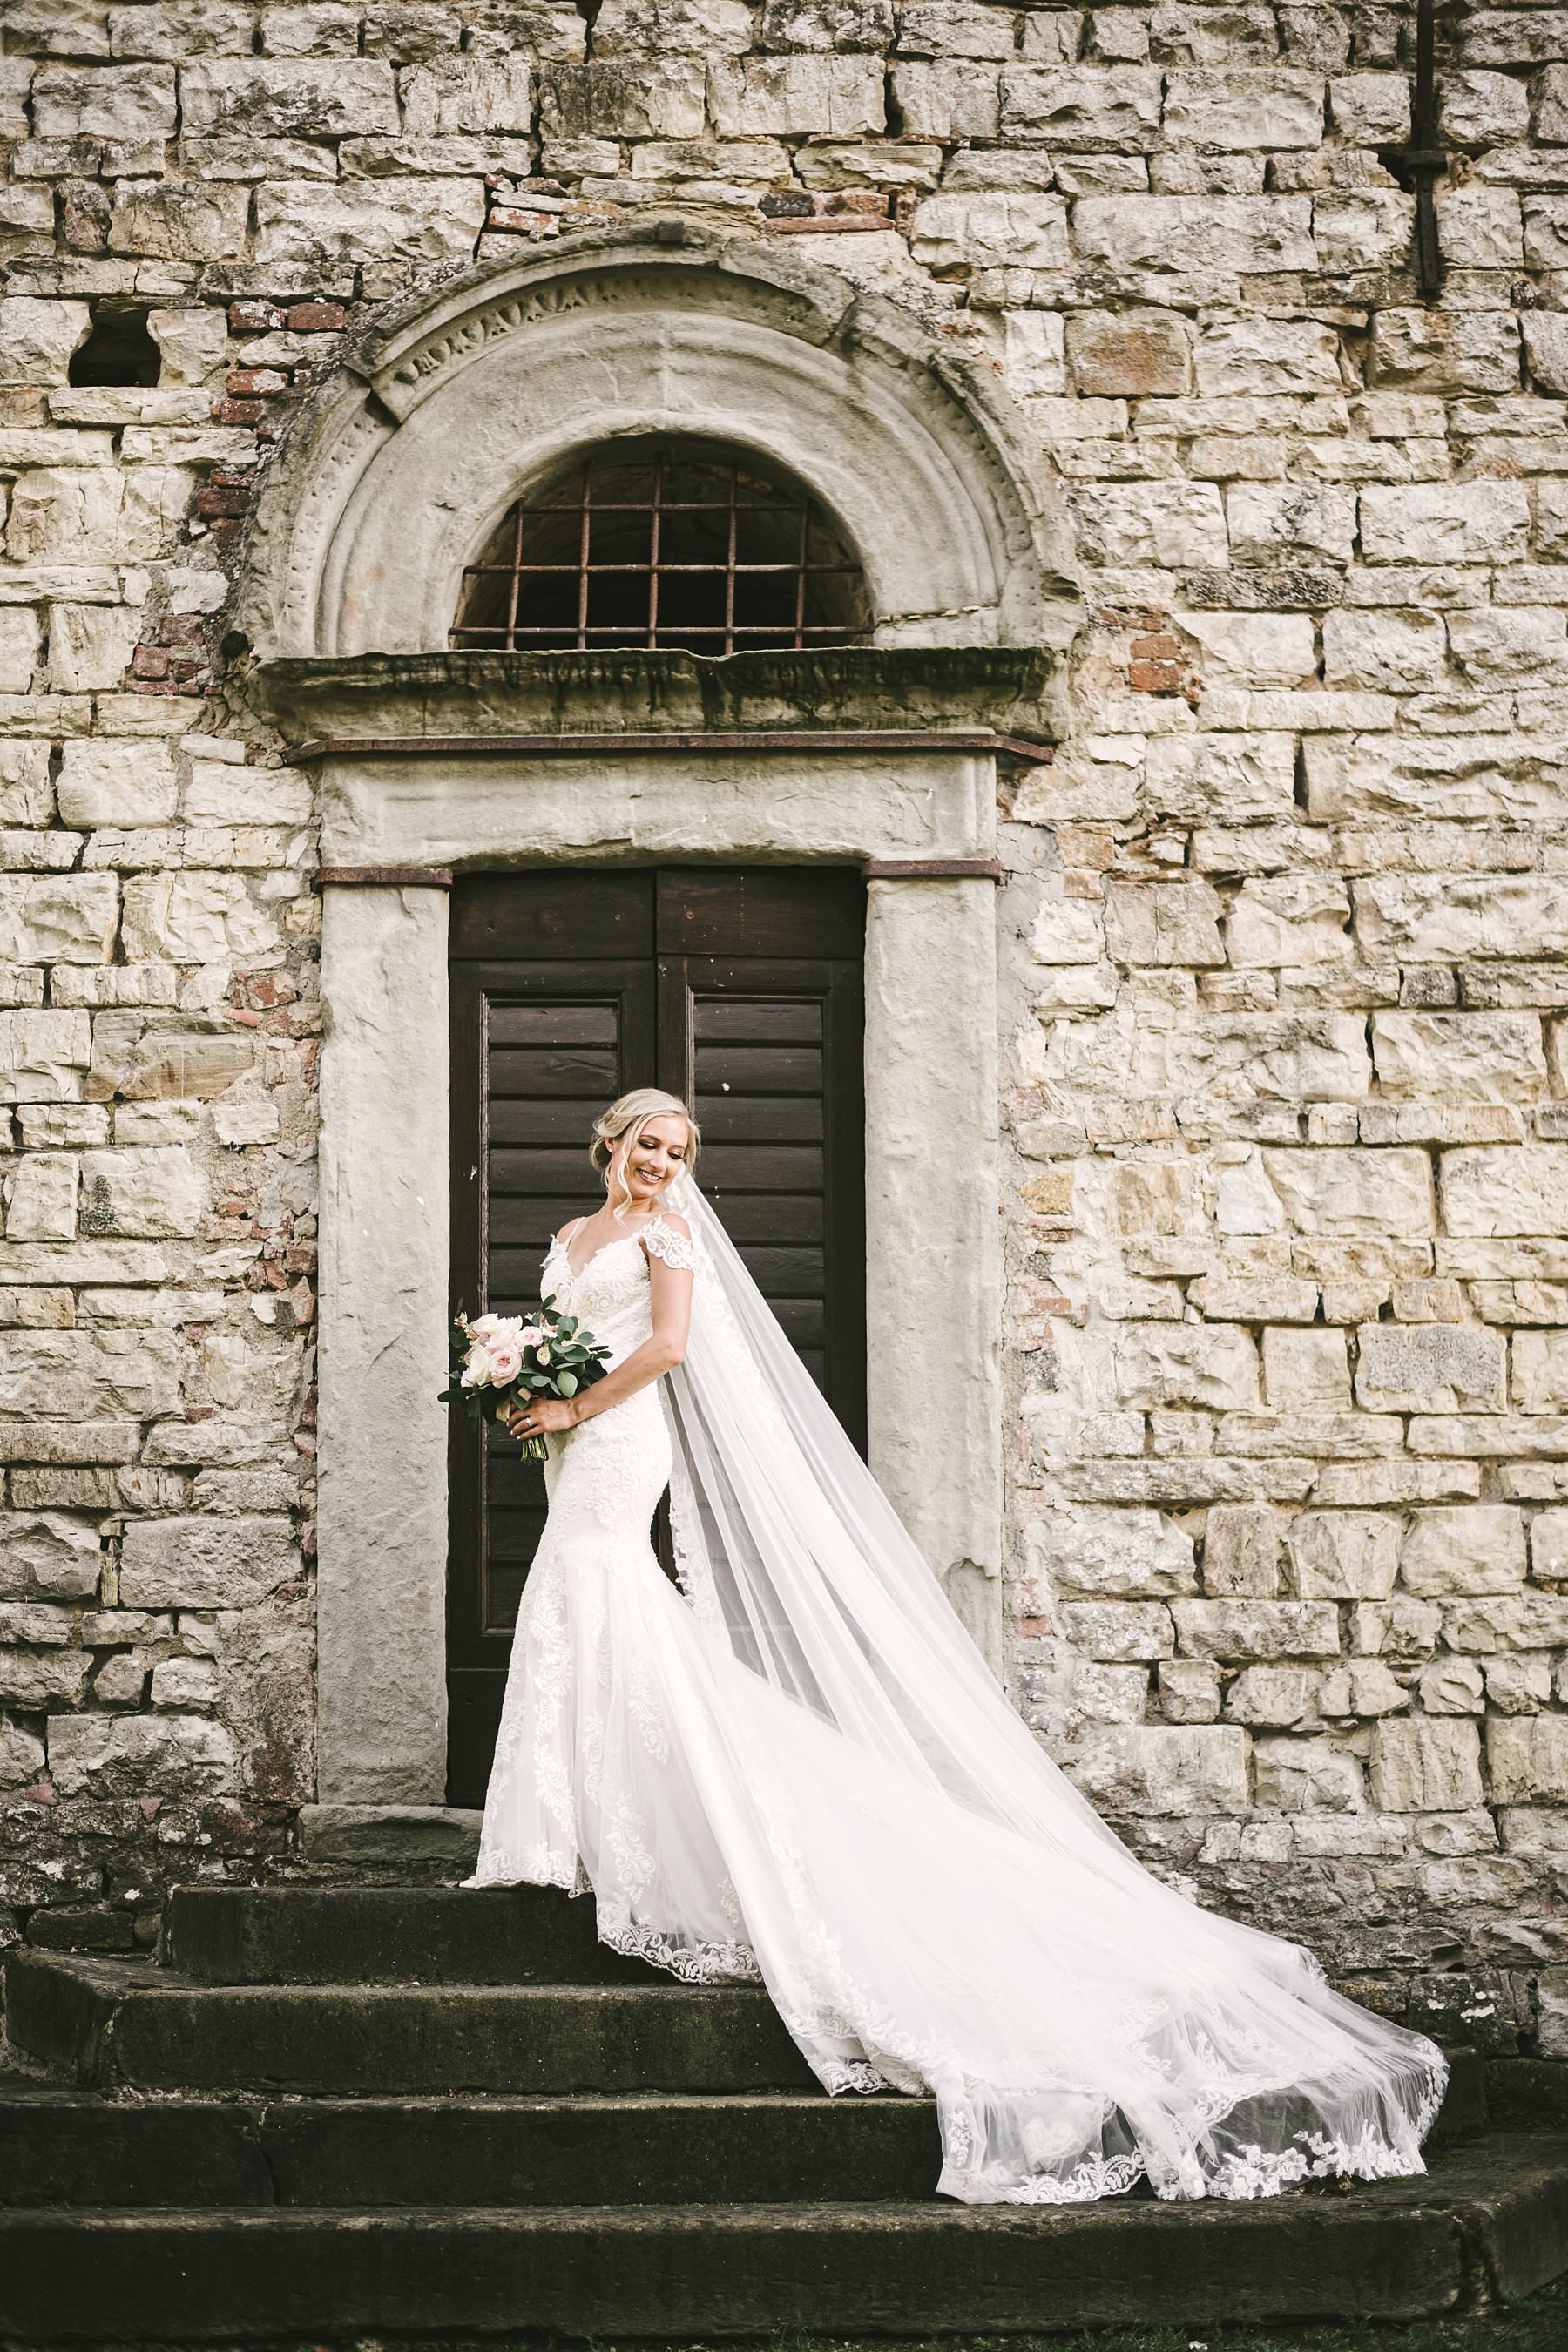 Romantic wedding in Italy at the charming Castello del Trebbio. Gorgeous bride Andorra wedding portrait at Castello del Trebbio in the countryside of Tuscany near Florence